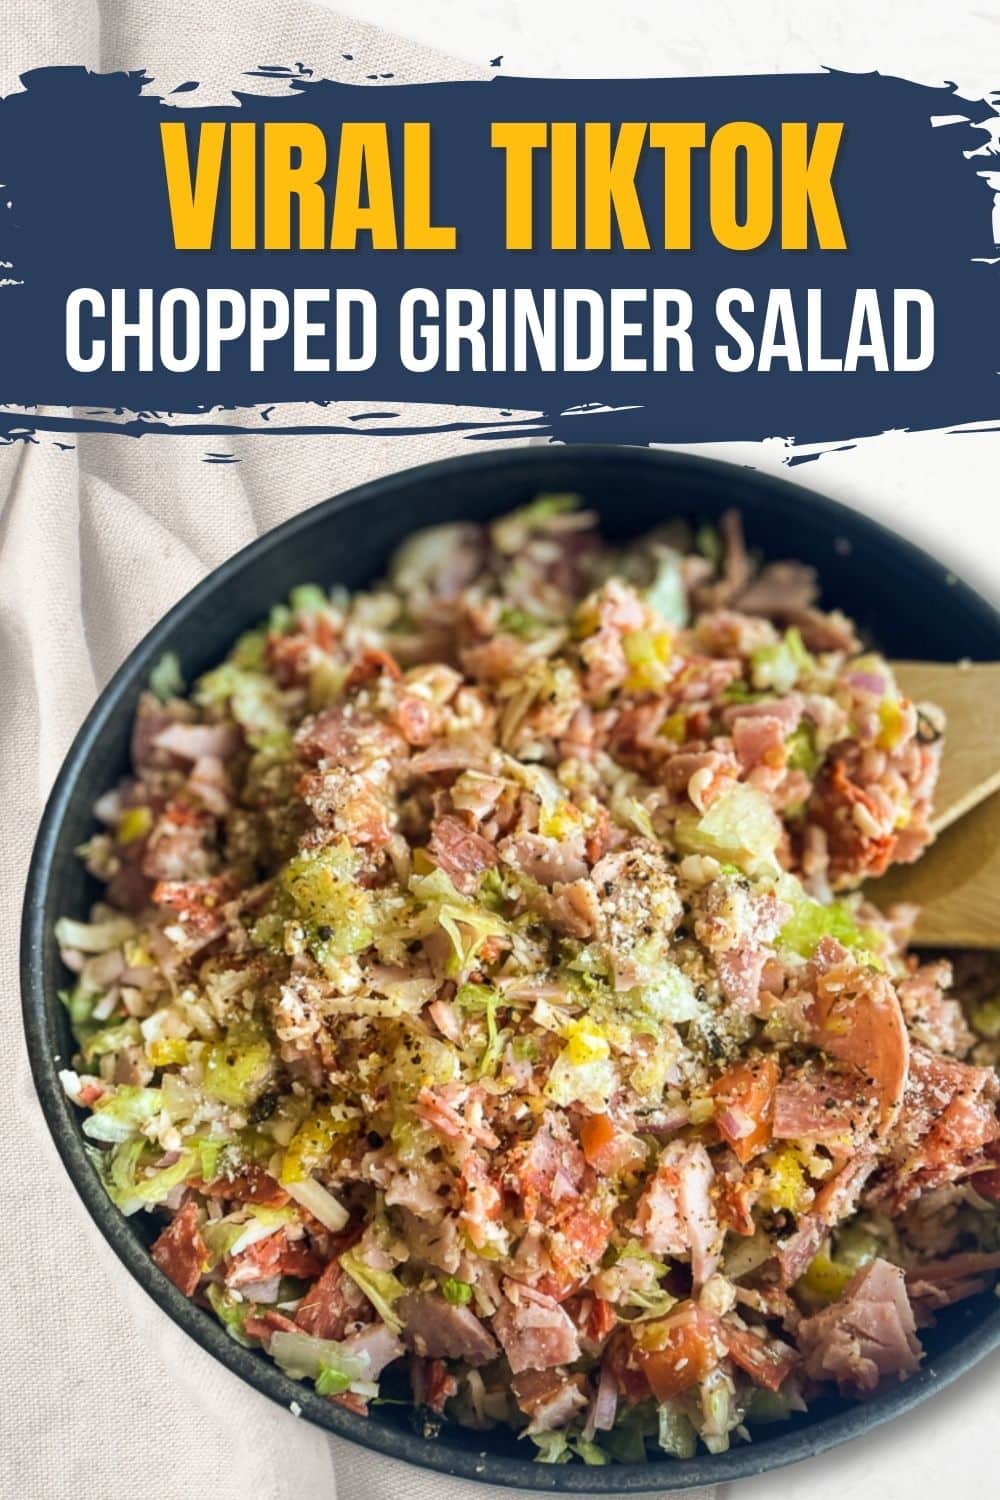  Viral TikTok Chopped Grinder Salad in a black bowl, showcasing a vibrant mix of chopped meats, cheeses, lettuce and vegetables, with a text overlay highlighting the dish's viral popularity on the social media platform.